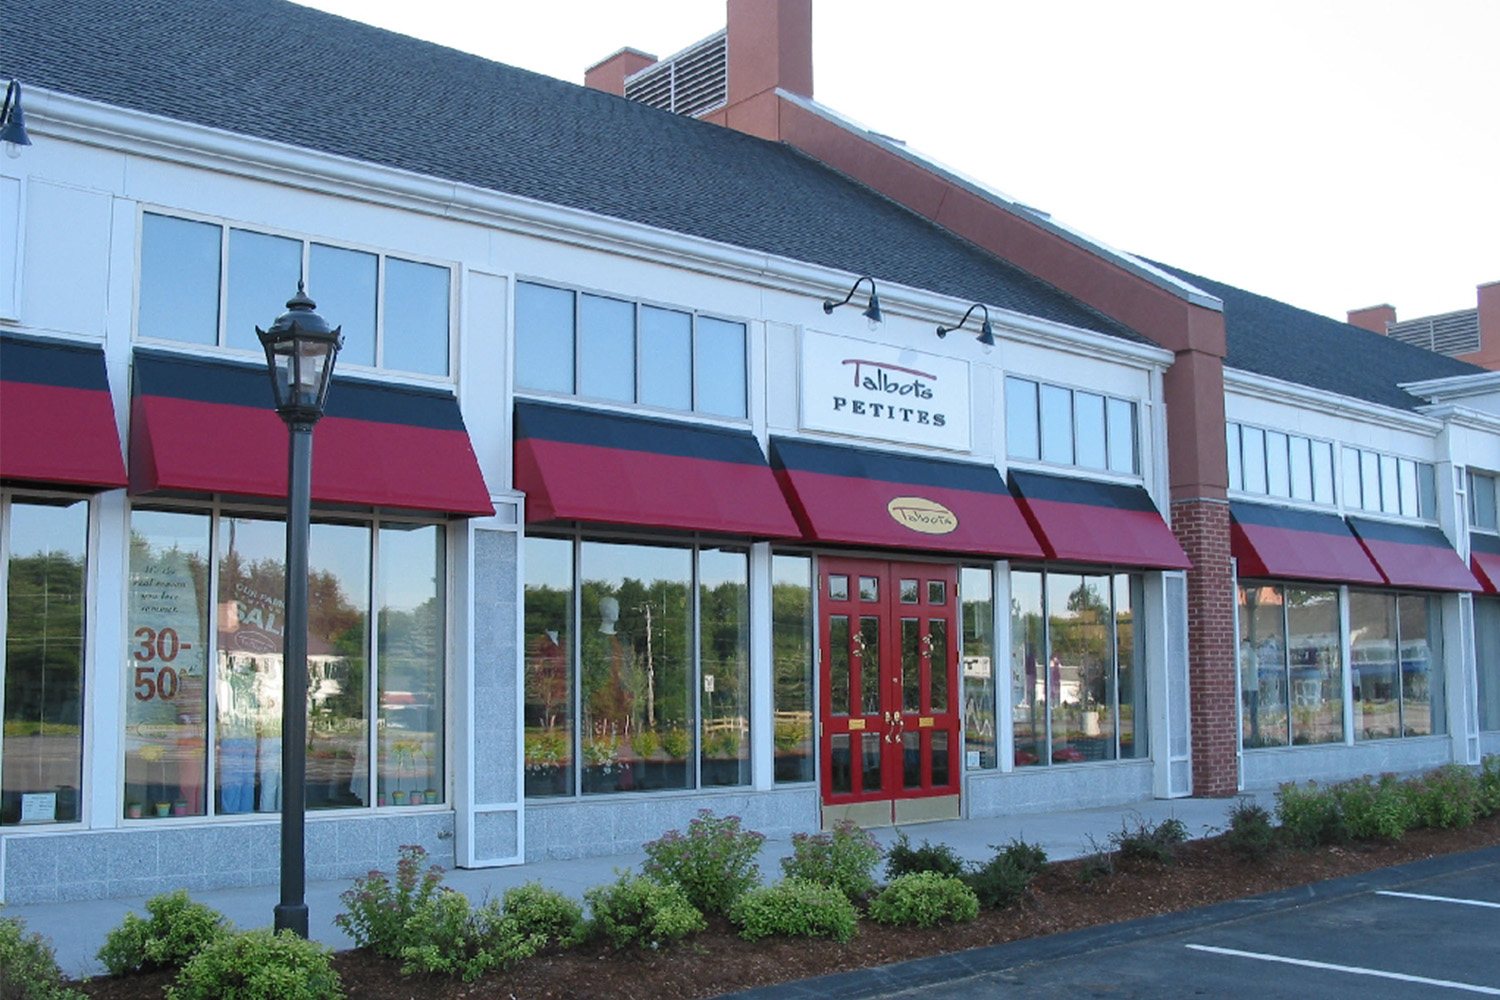 Longview of the "Talbots" store exterior